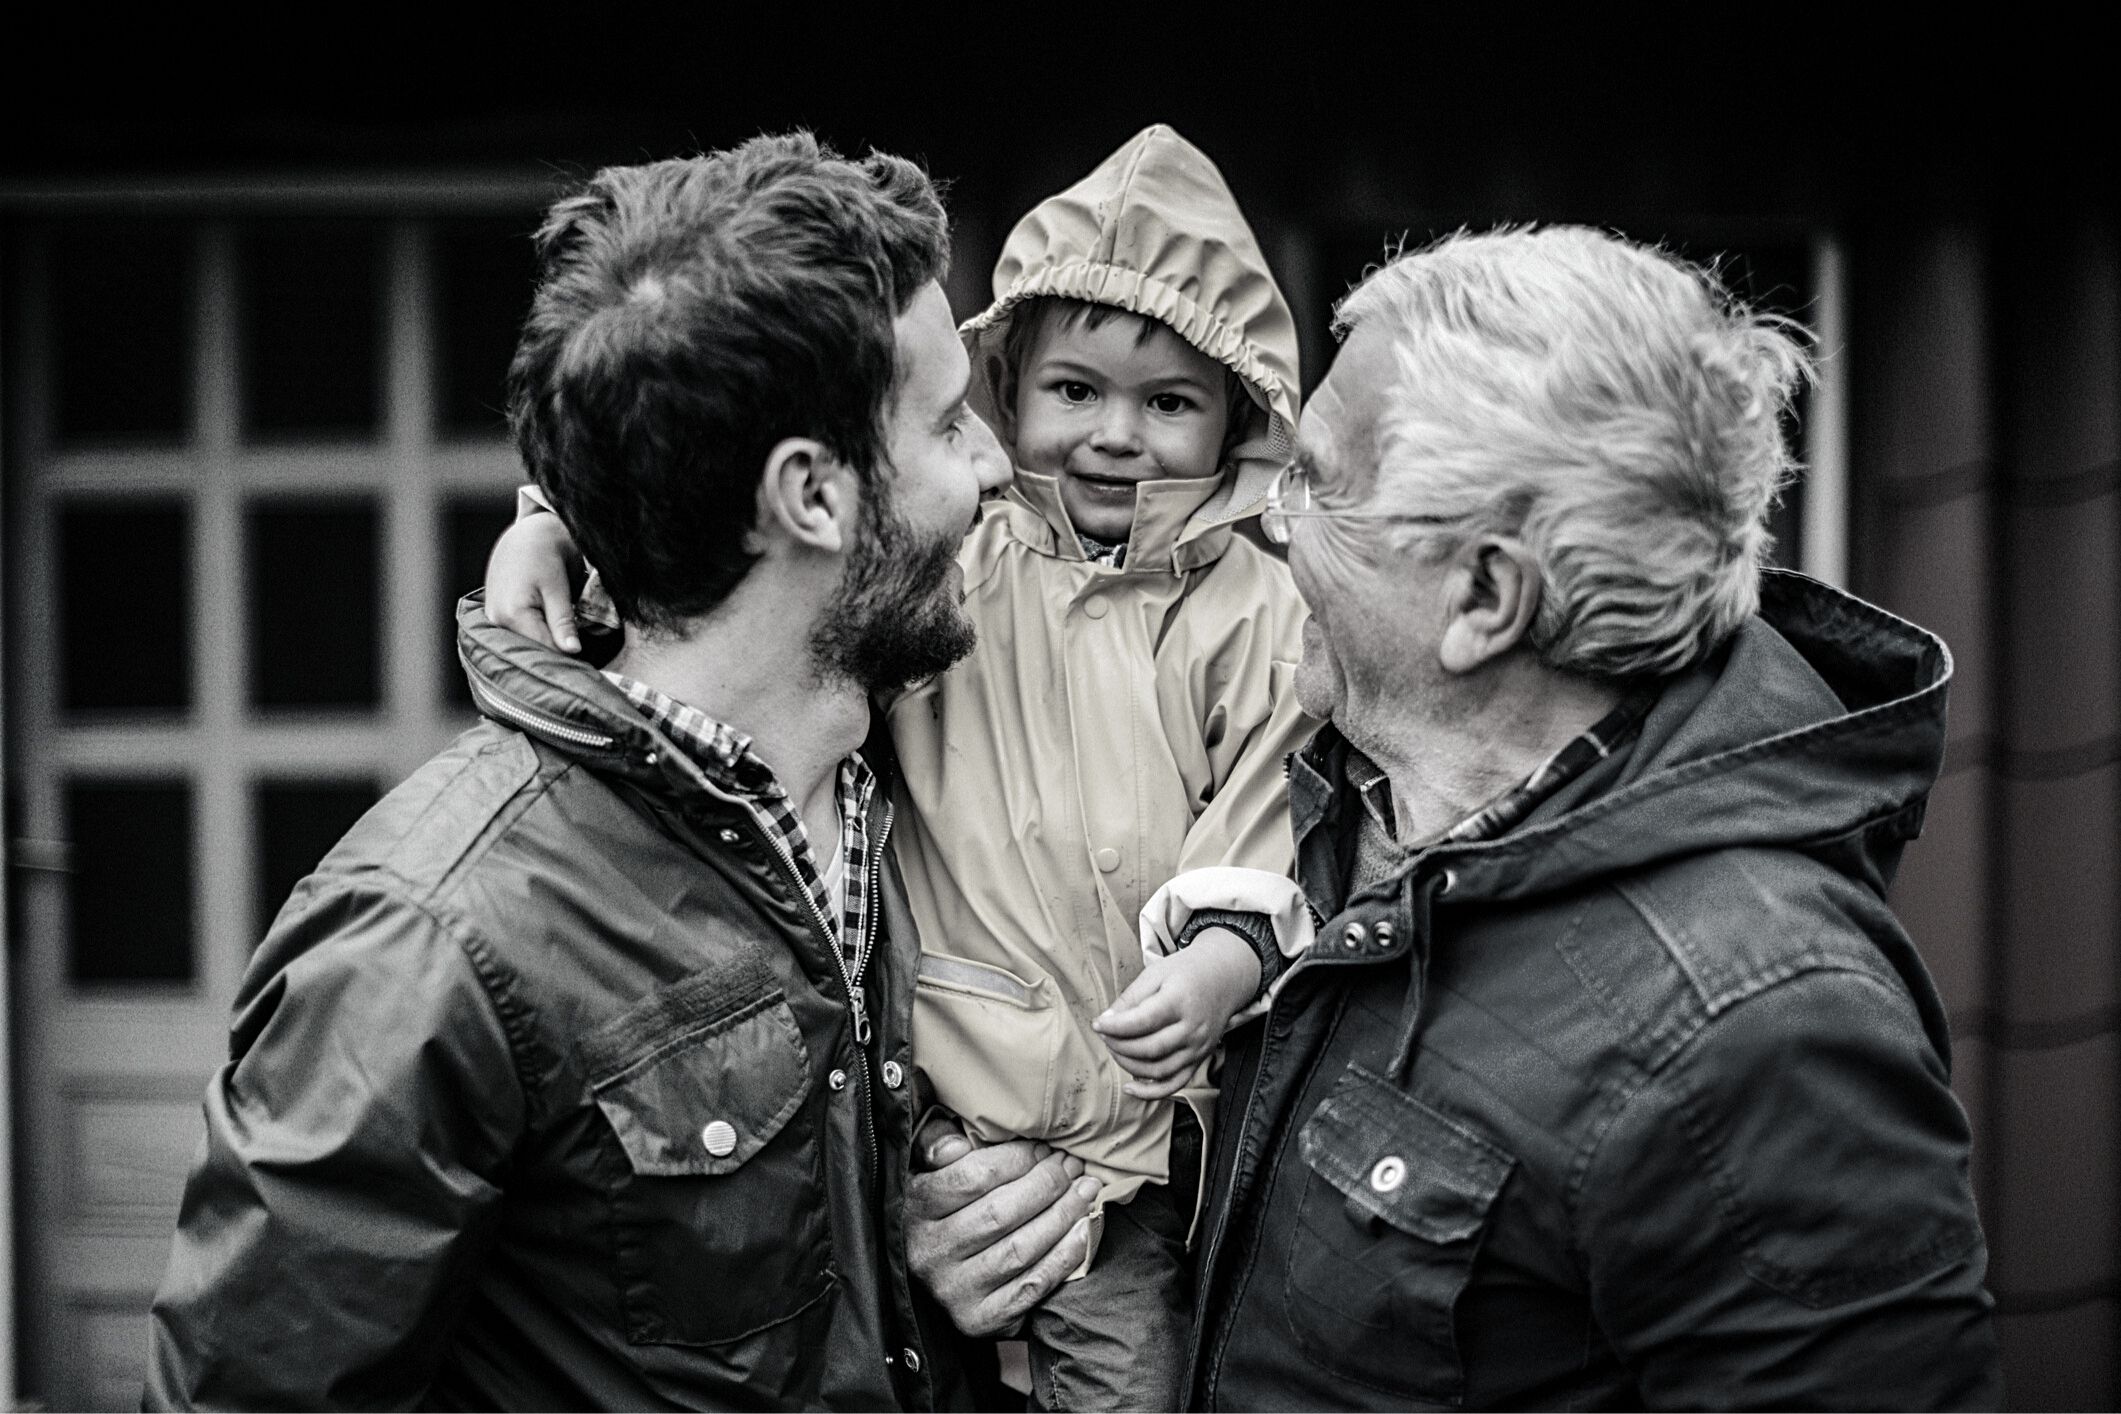 How do today's dads differ from their grandfathers?